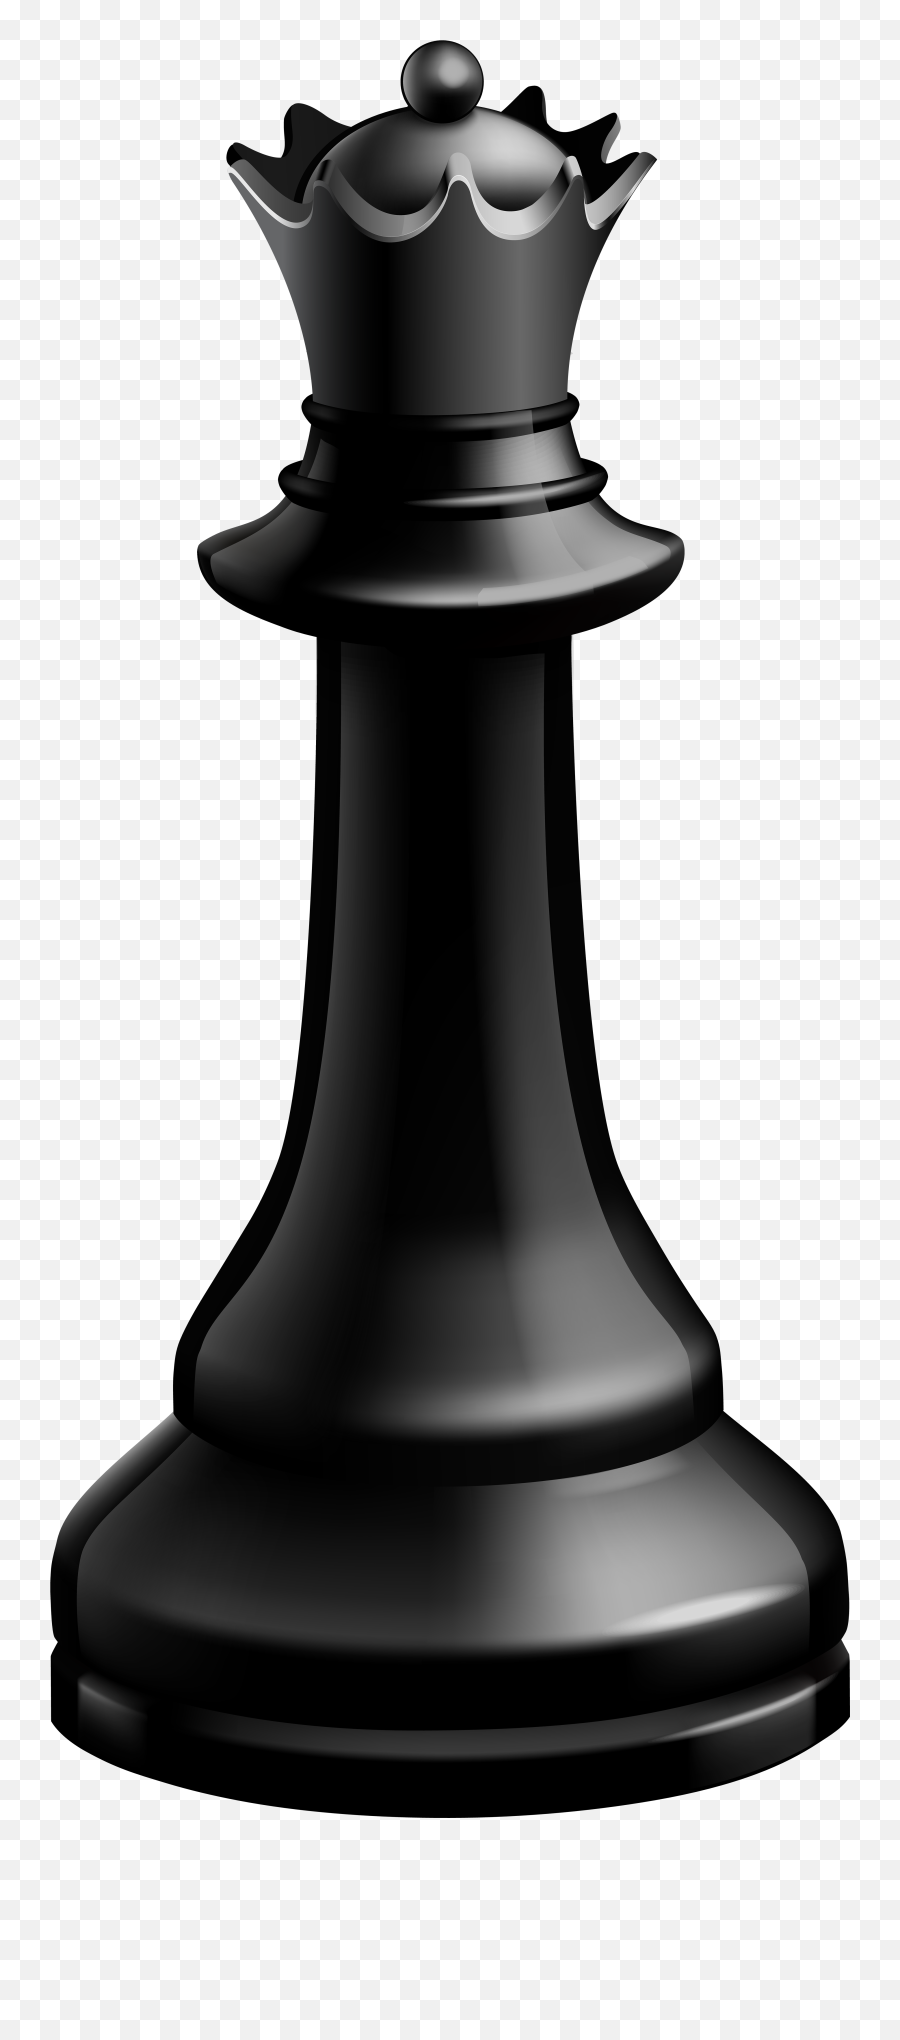 Black Queen Chess Piece Clipart - King Chess Piece Png Emoji,Queen Chess Piece Emoji